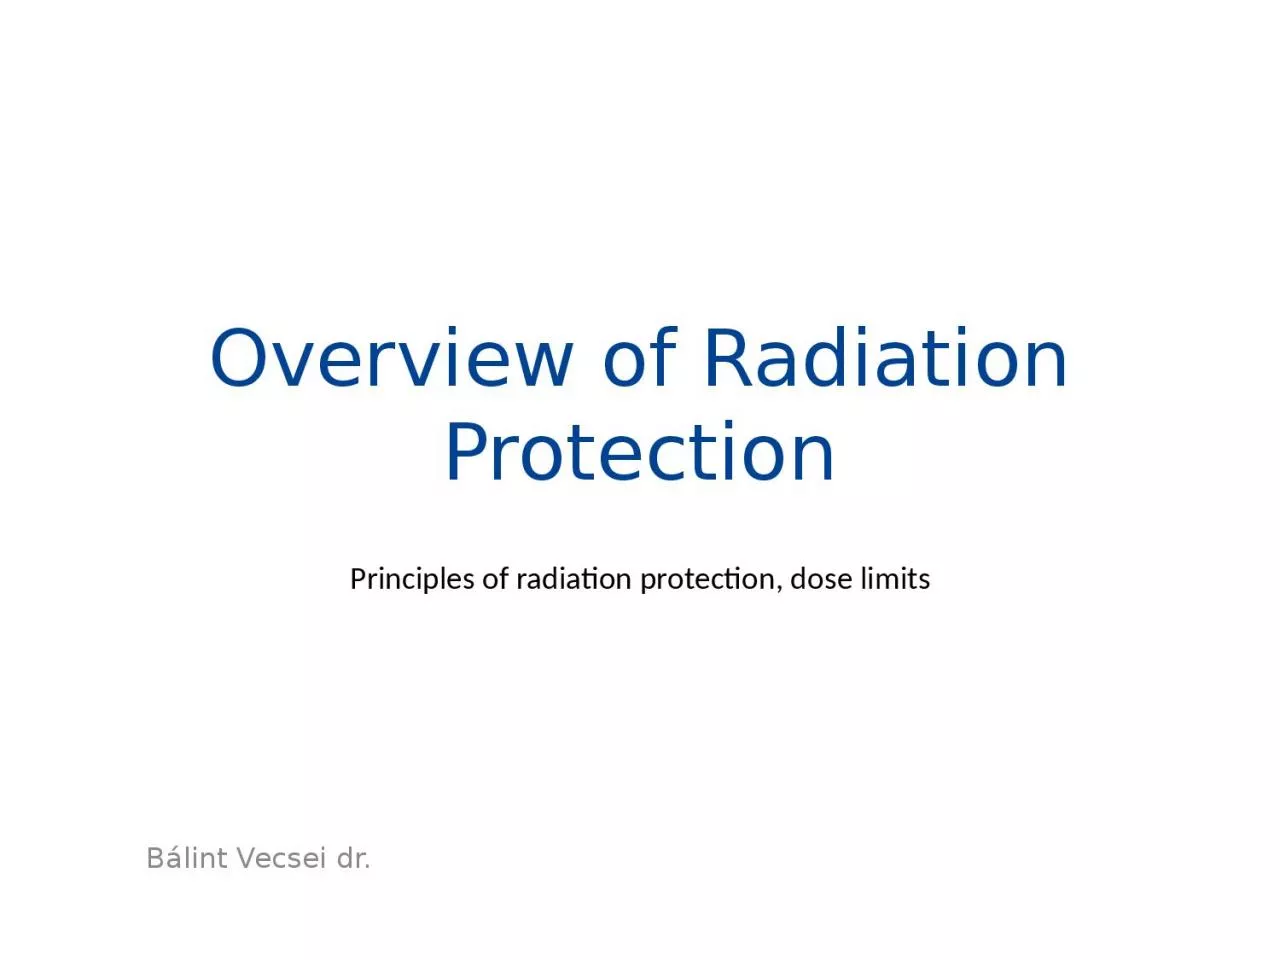 Overview of Radiation Protection